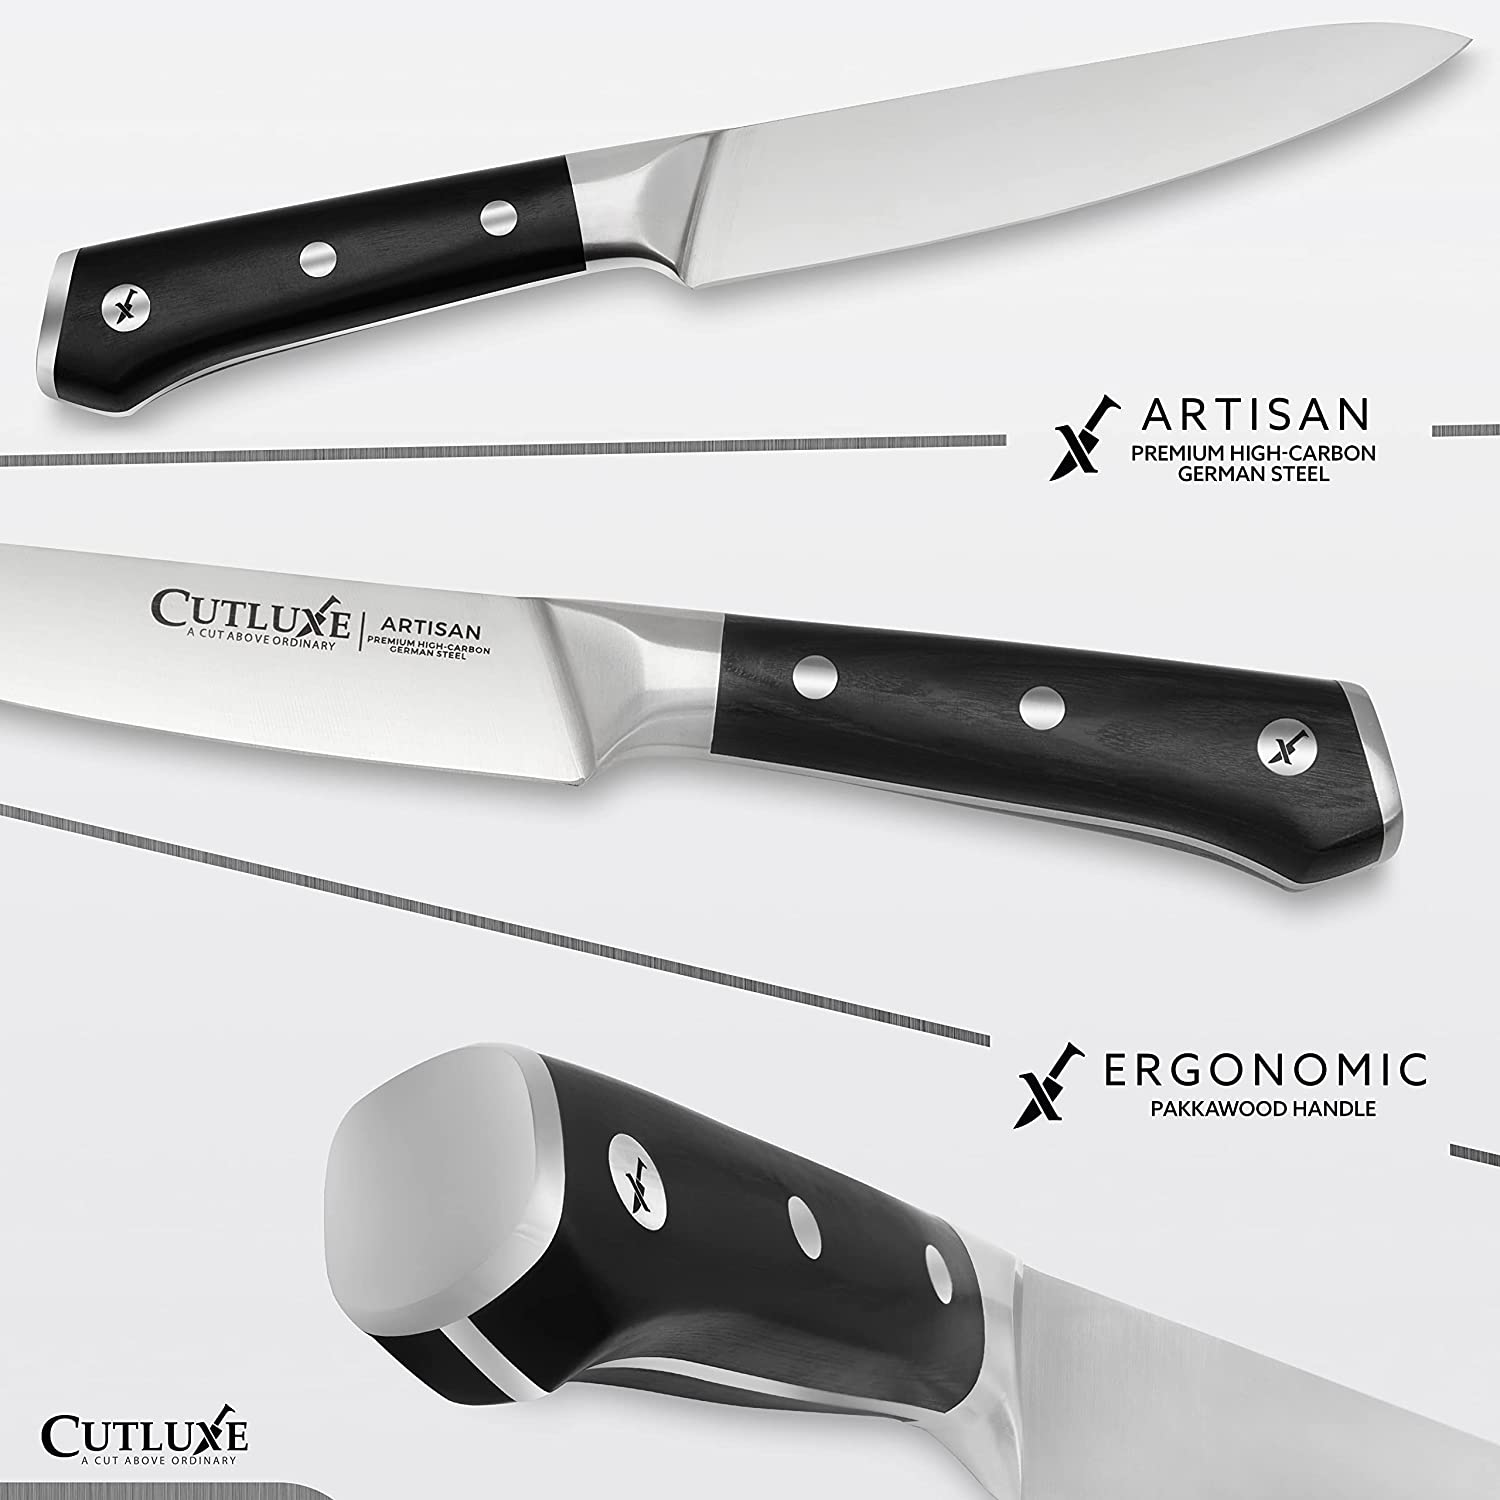 TUO Kitchen Utility Knife 5 inch Small Chef Knife German High Carbon  Stainless Steel Kitchen Knife Ergonomic Pakkawood Handle with Gift Box-New  Legacy Series - Yahoo Shopping